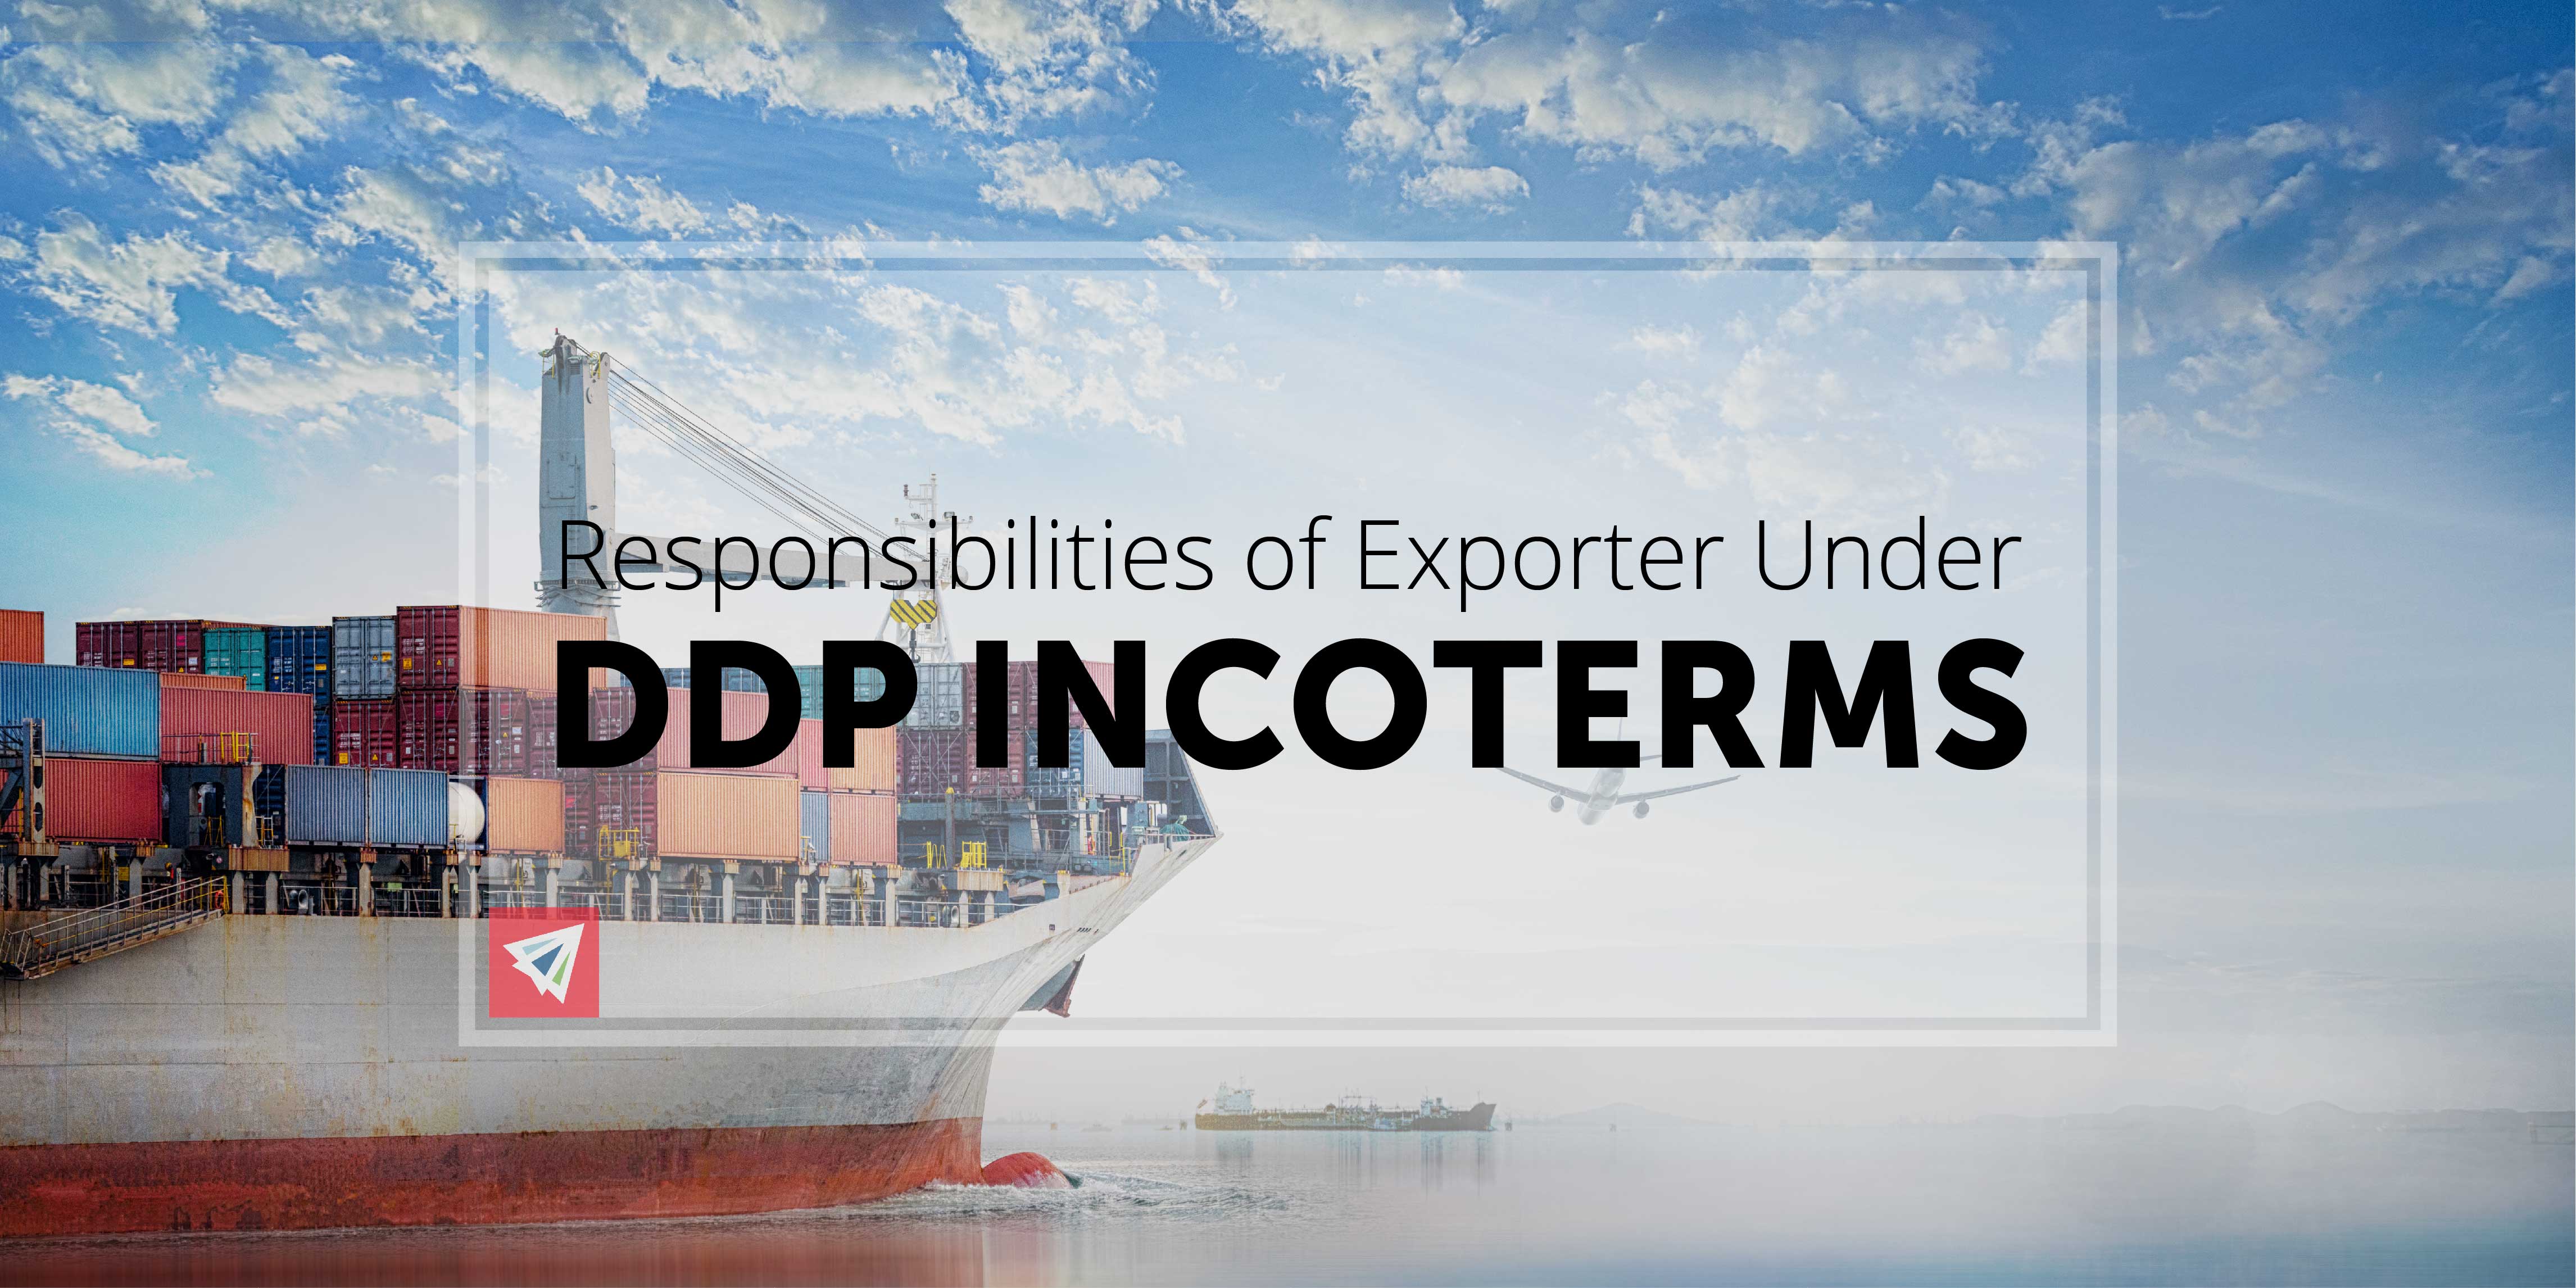 Responsibilities of Exporter under DDP Incoterms